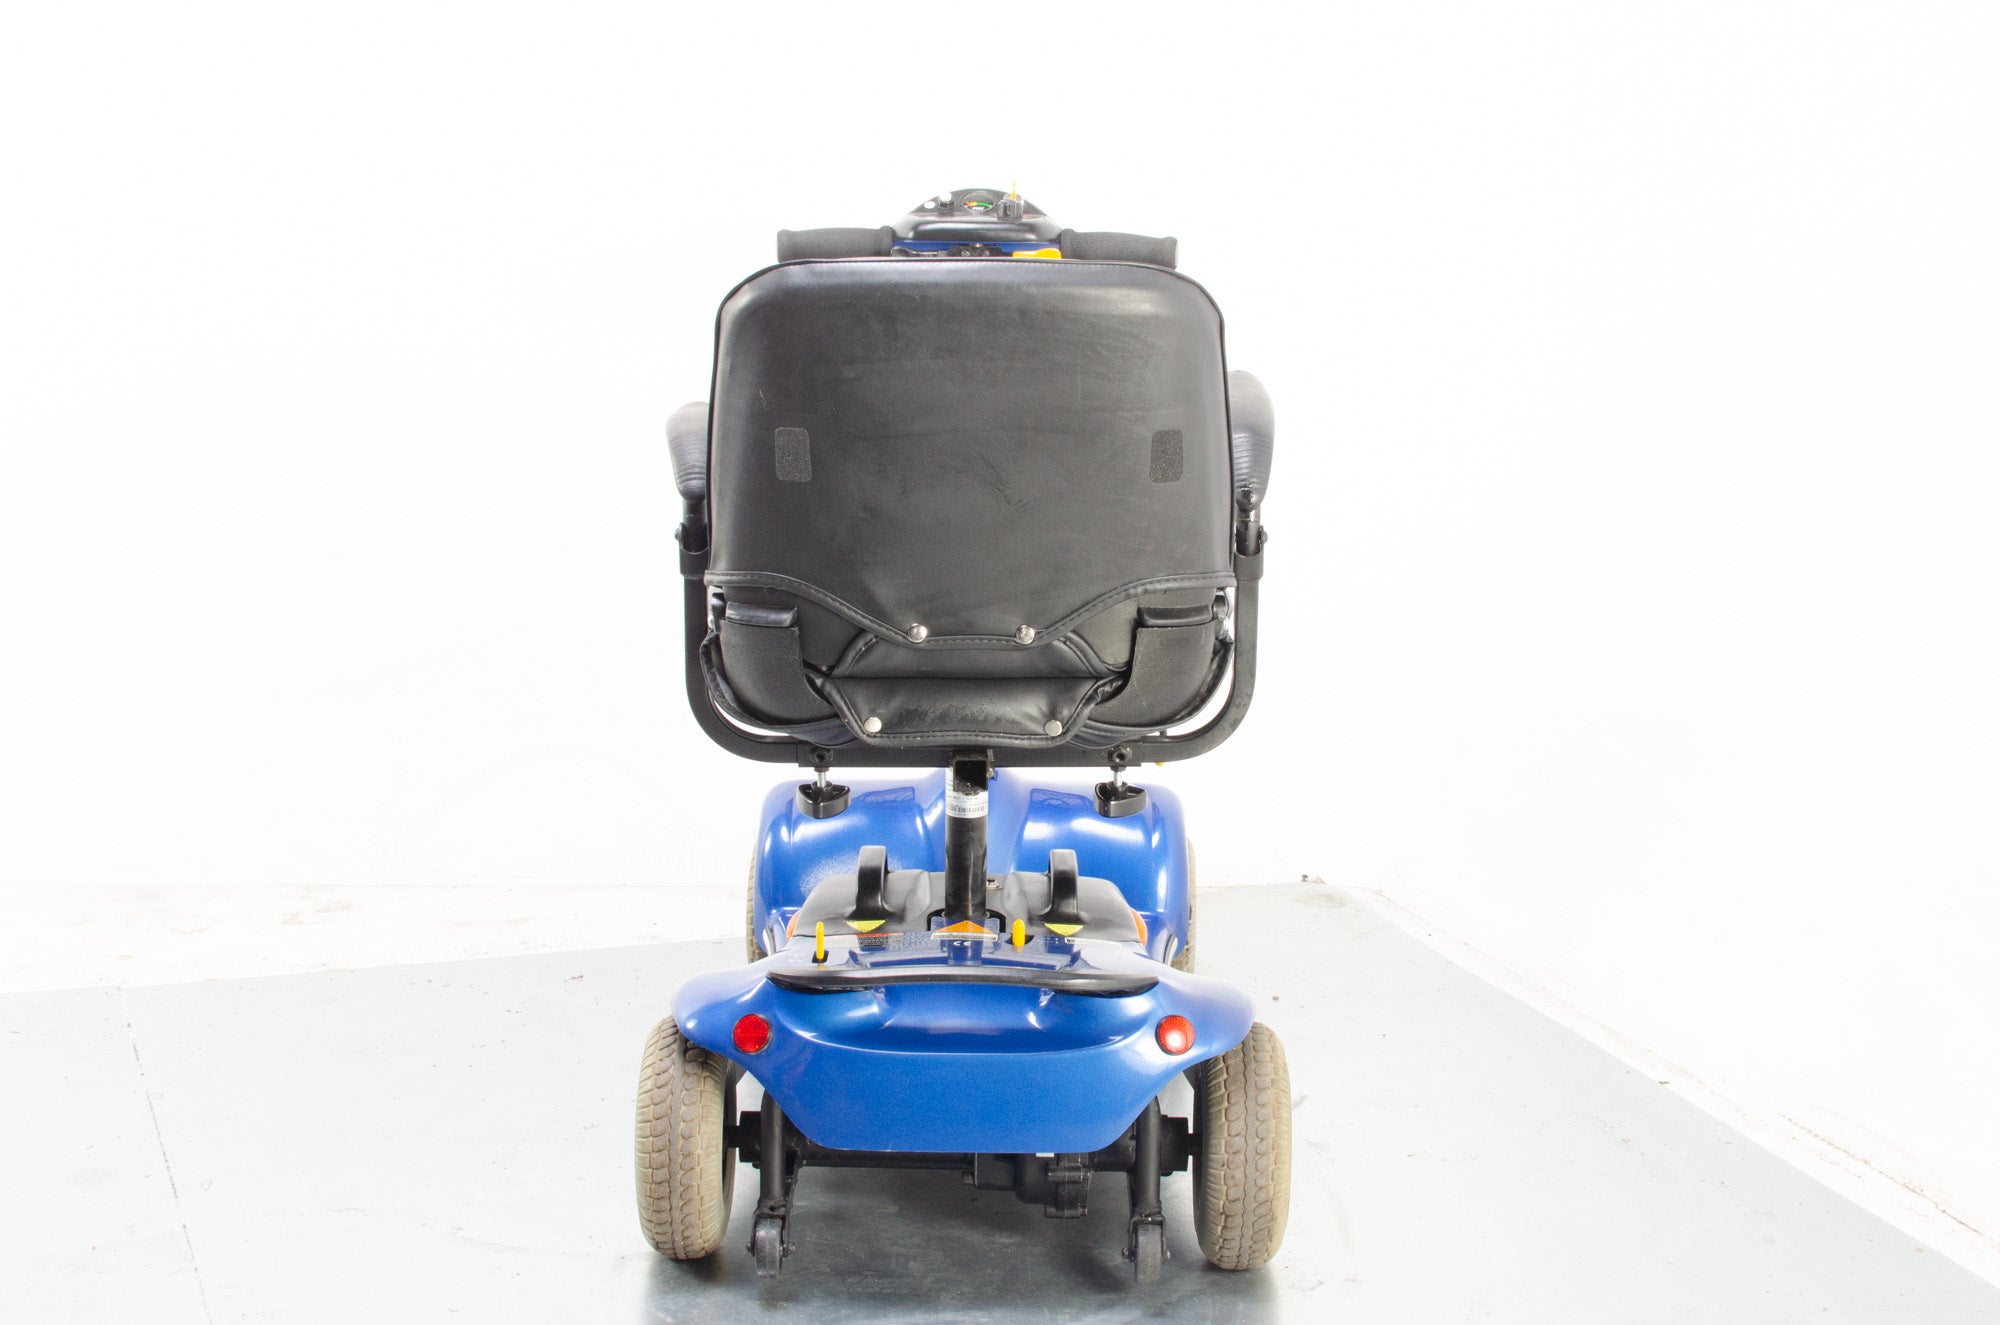 2017 Sunrise Medical Sterling Pearl 4mph Small Electric Mobility Boot Scooter in Blue